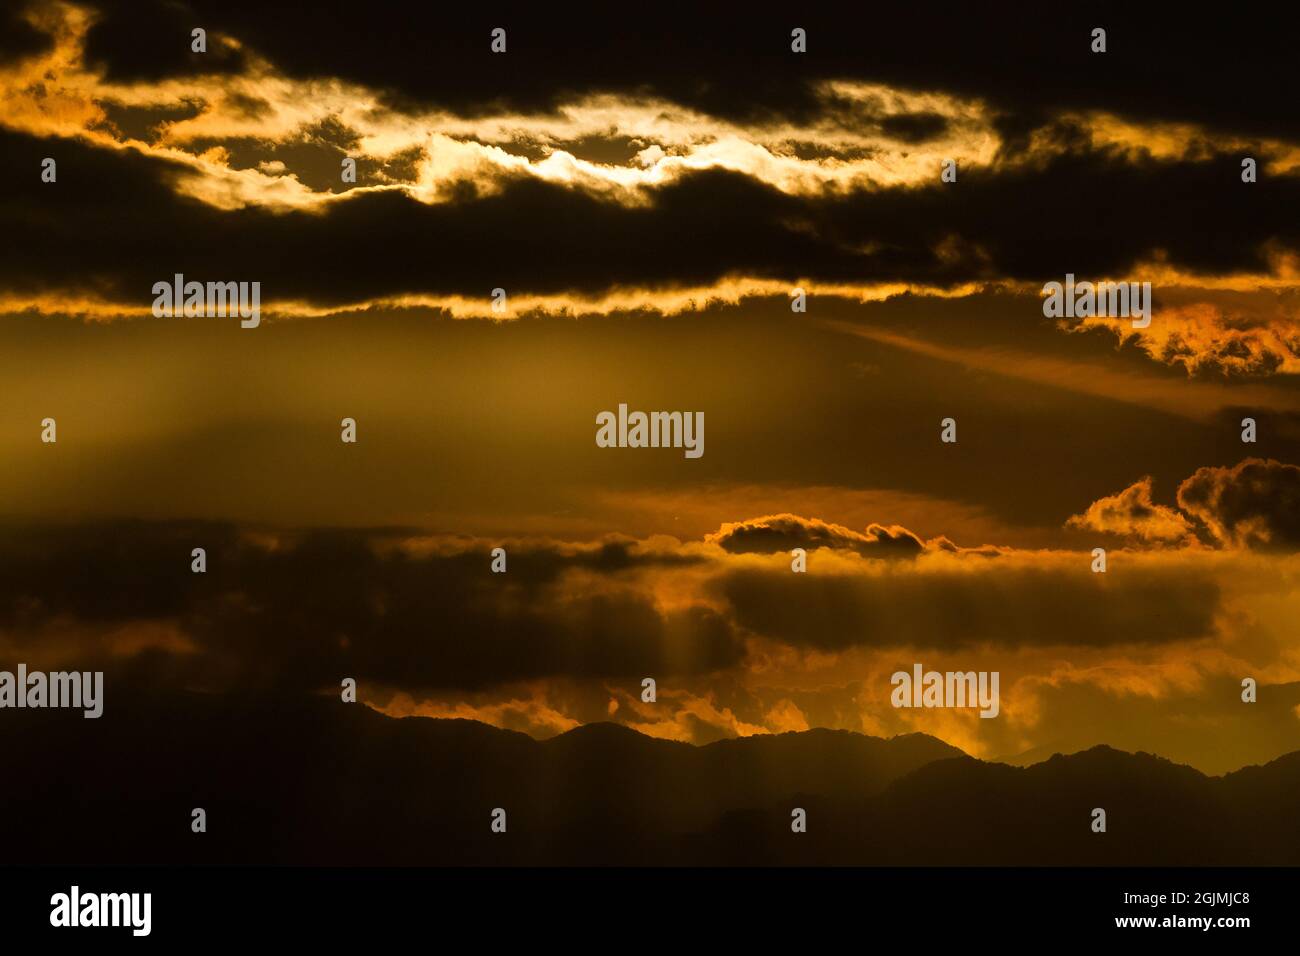 Sunset clouds at dusk over mountains in  Japan. Stock Photo